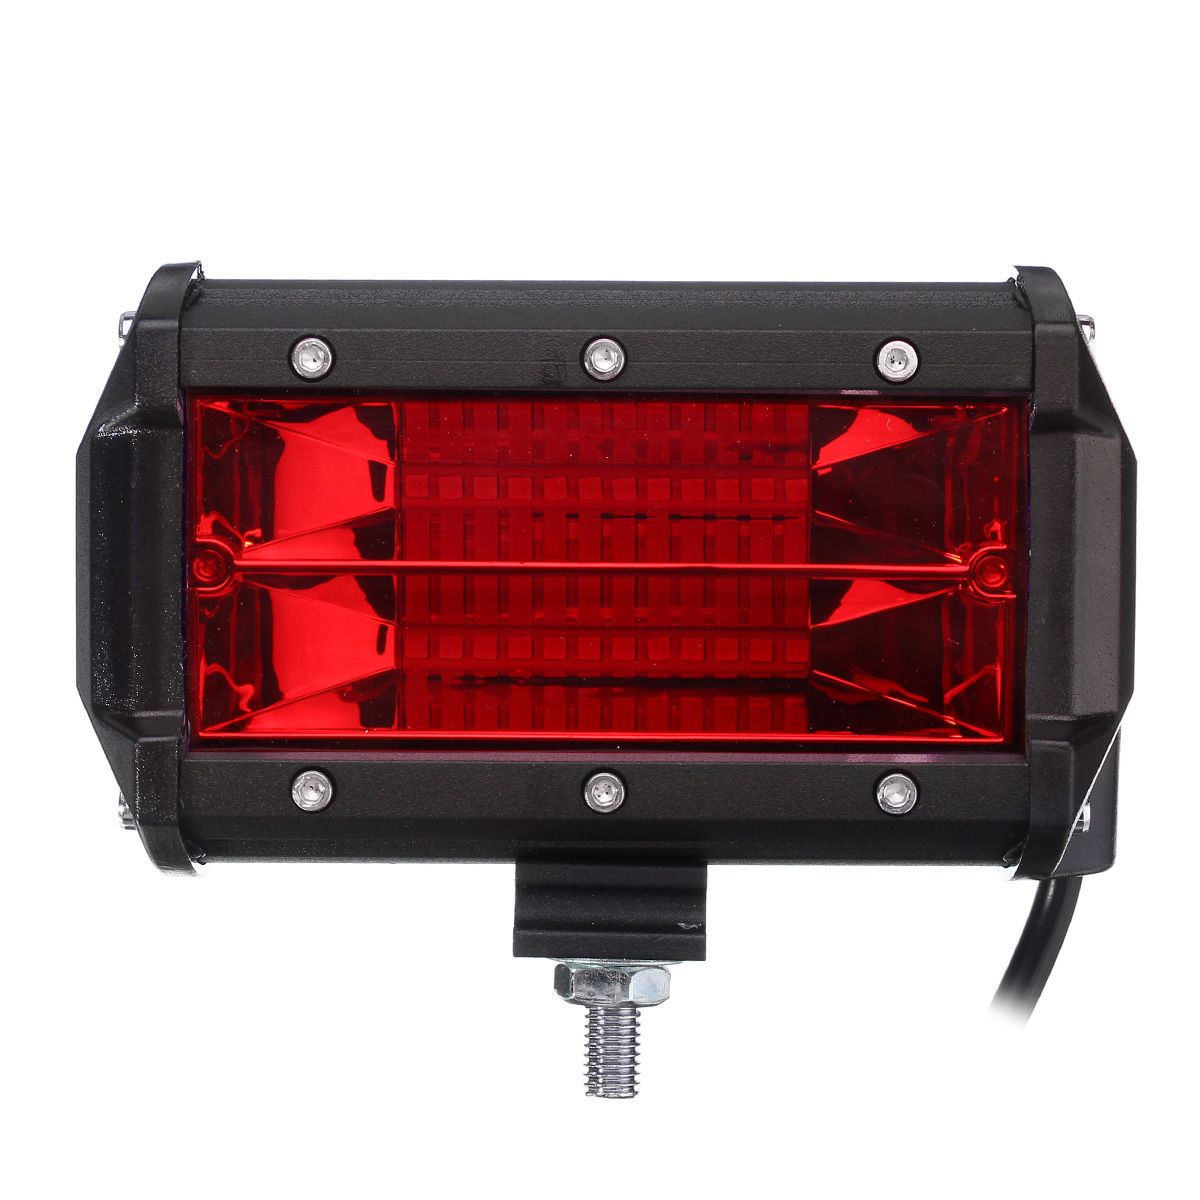 5Inch-48W-24-LED-Work-Light-Bar-Flood-Beam-Lamp-for-Car-SUV-Boat-Driving-Offroad-ATV-1427252